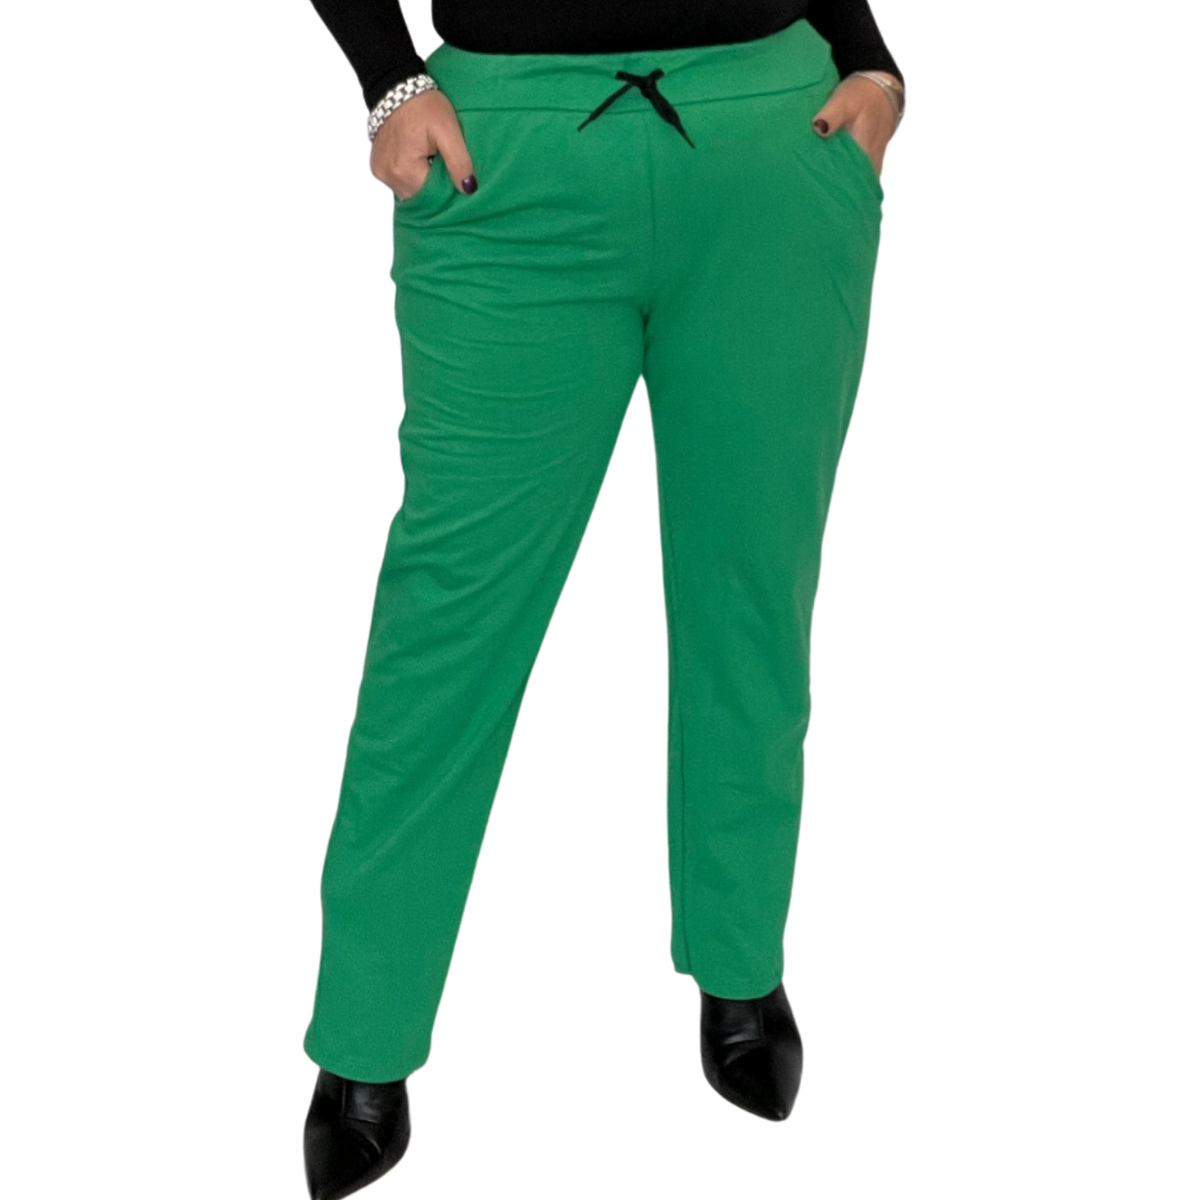 BRIGHT COLOURED JOGGERS ELASTIC WAIST TROUSERS WITH POCKETS